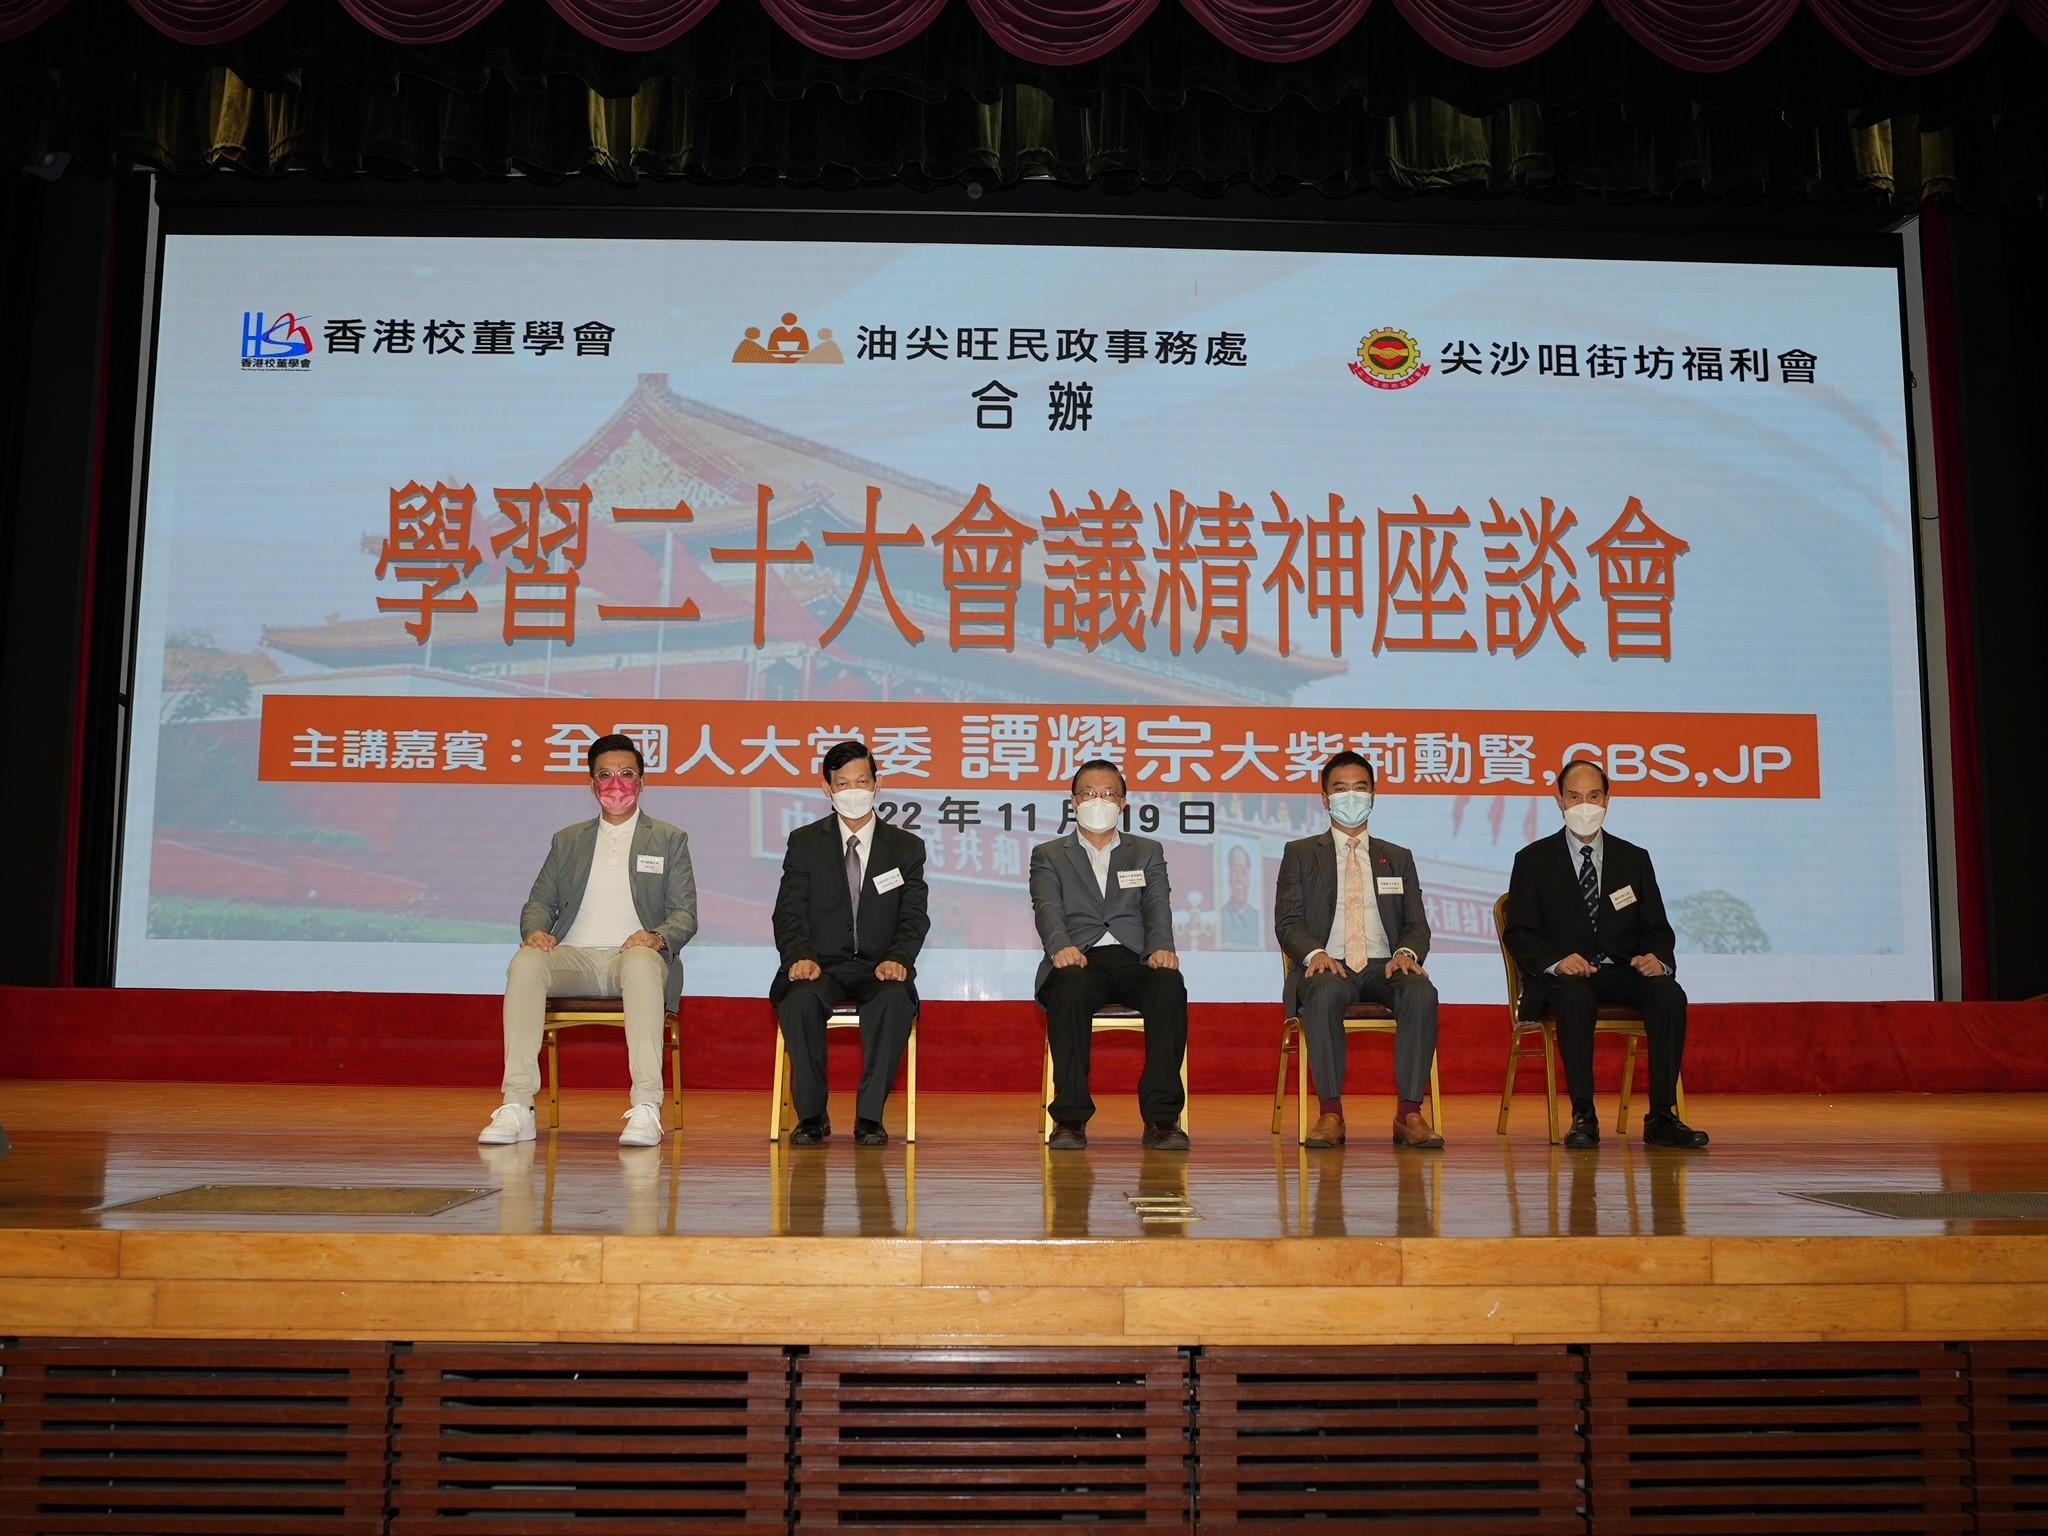 The Yau Tsim Mong District Office, together with the Hong Kong Academy of School Managers and the Tsim Sha Tsui District Kaifong Welfare Association, held a session on "Spirit of the 20th National Congress of the CPC" at the Tsim Sha Tsui hall on November 19. Photo shows the officiating guests.